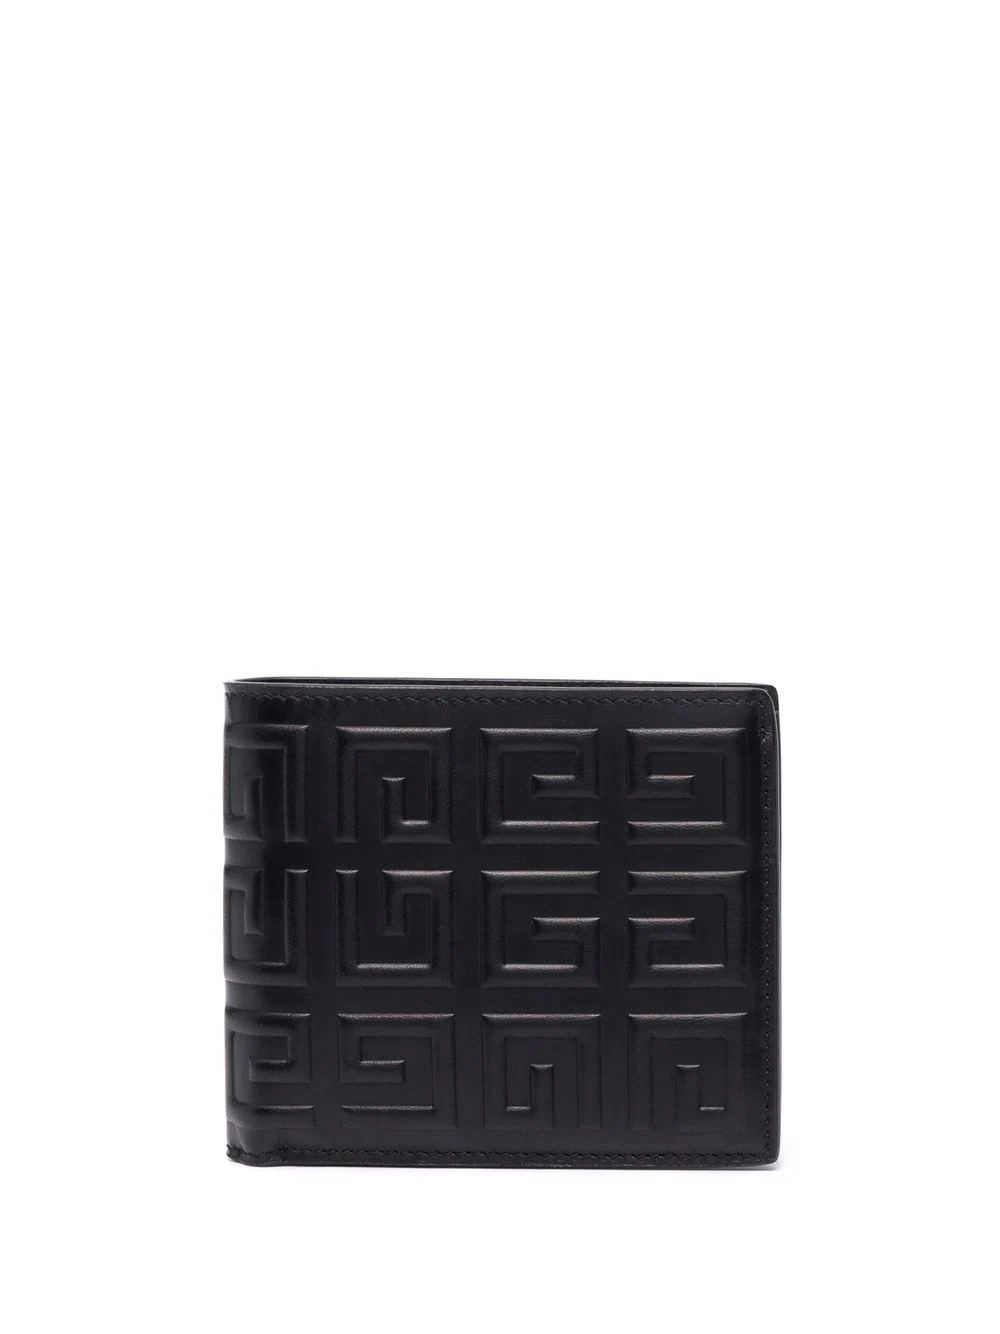 Givenchy - Embossed logo leather wallet